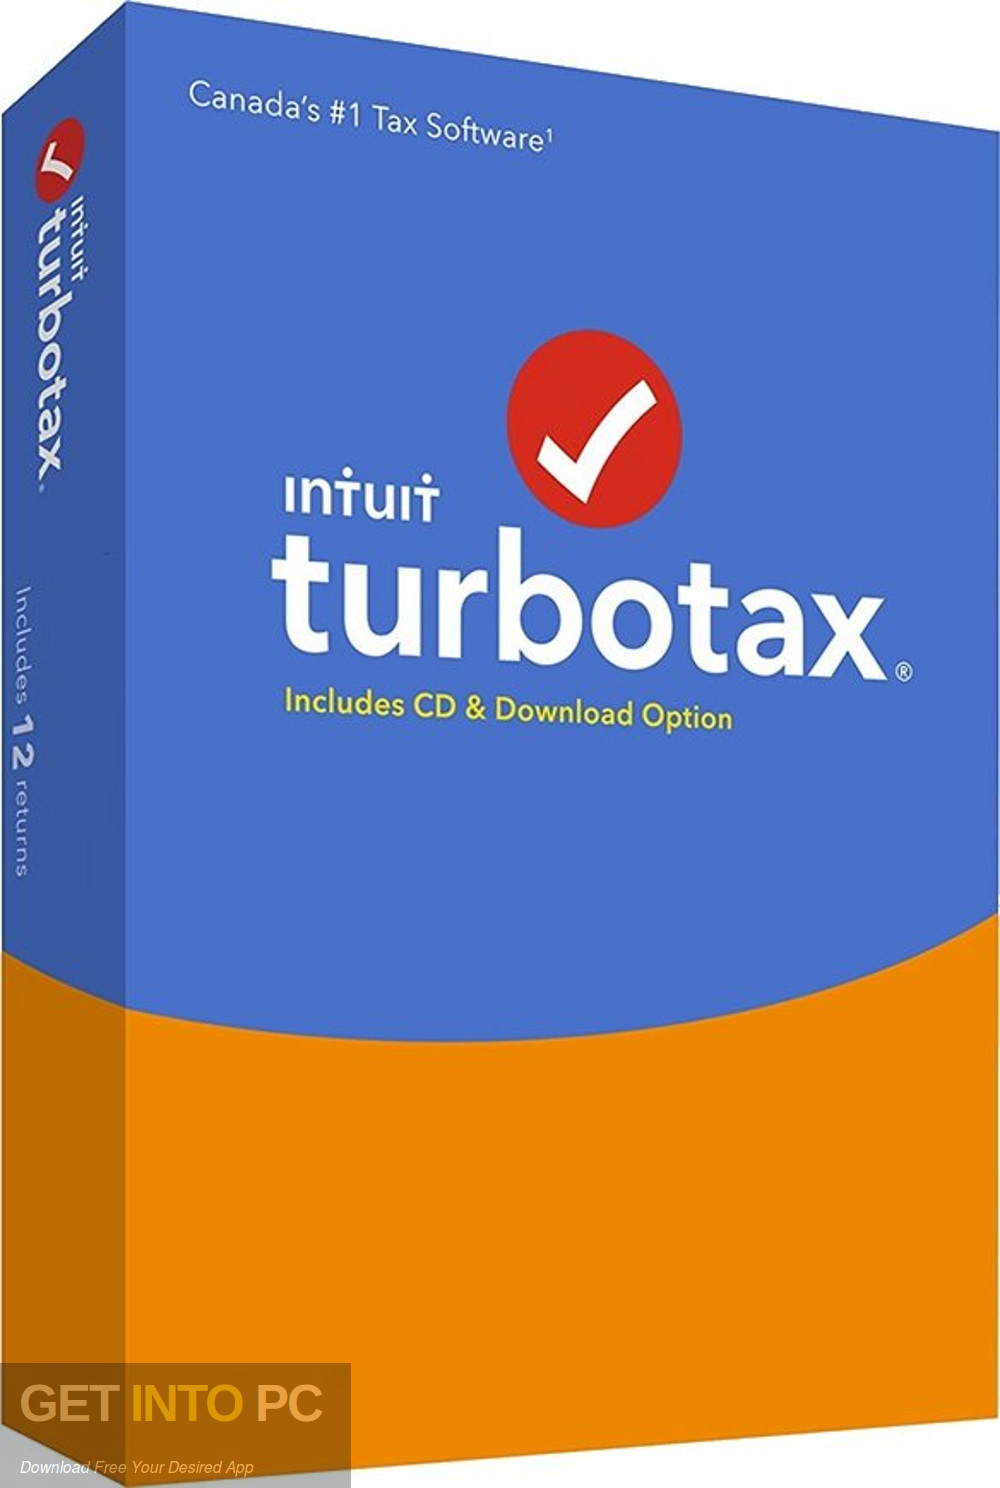 Intuit TurboTax 2019 Canada Edition Free Download GetintoPC.com